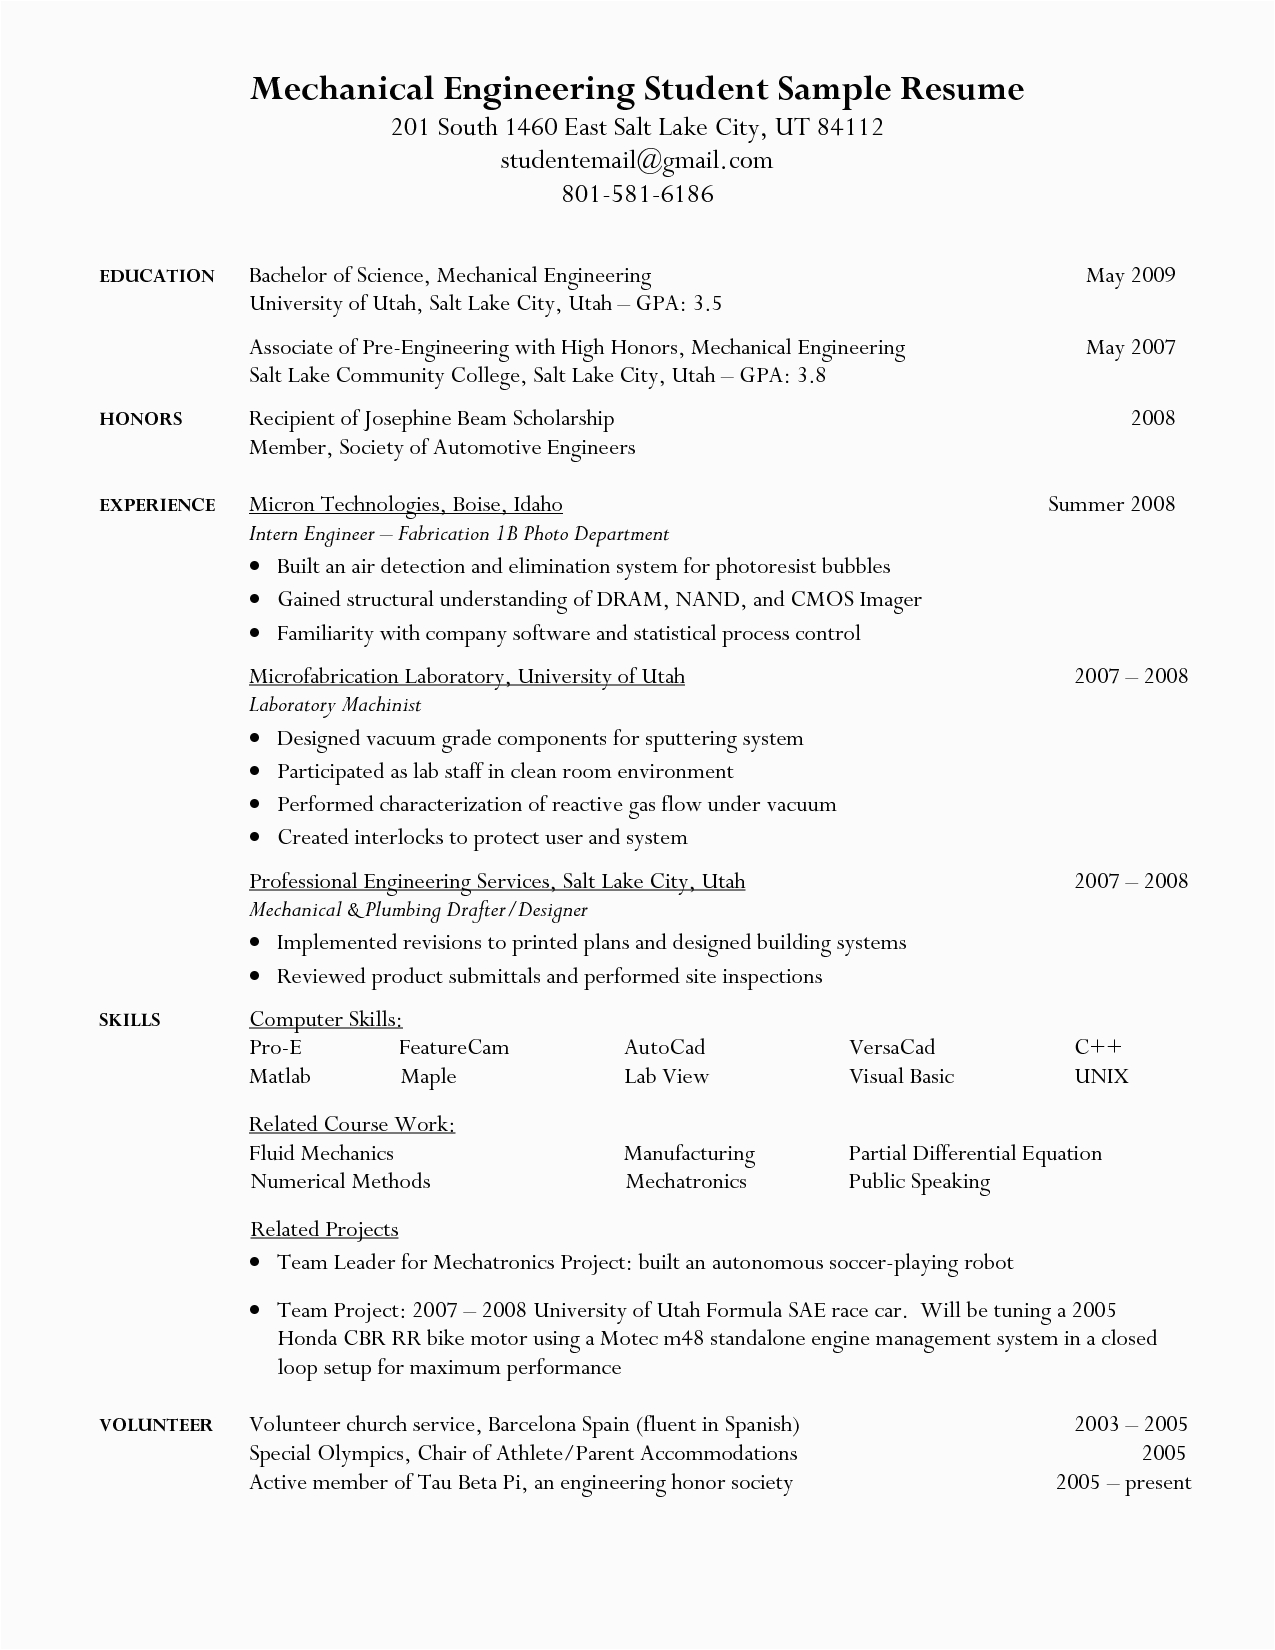 Resume Samples for Engineering Students In College Engineering Student Resume Google Search